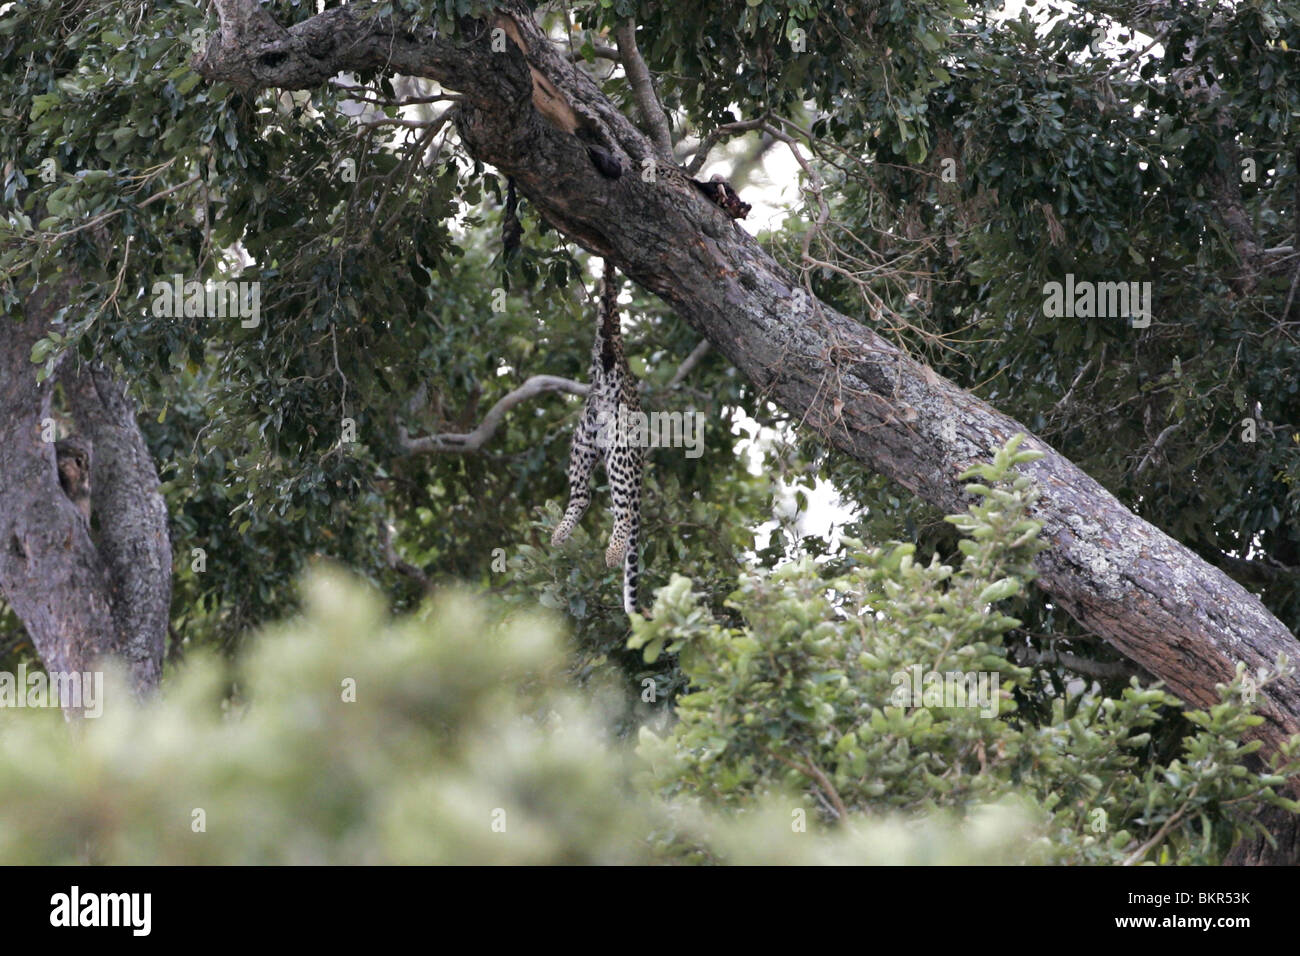 Leopard, Carcass hanging in tree, Kruger park, South Africa Stock Photo